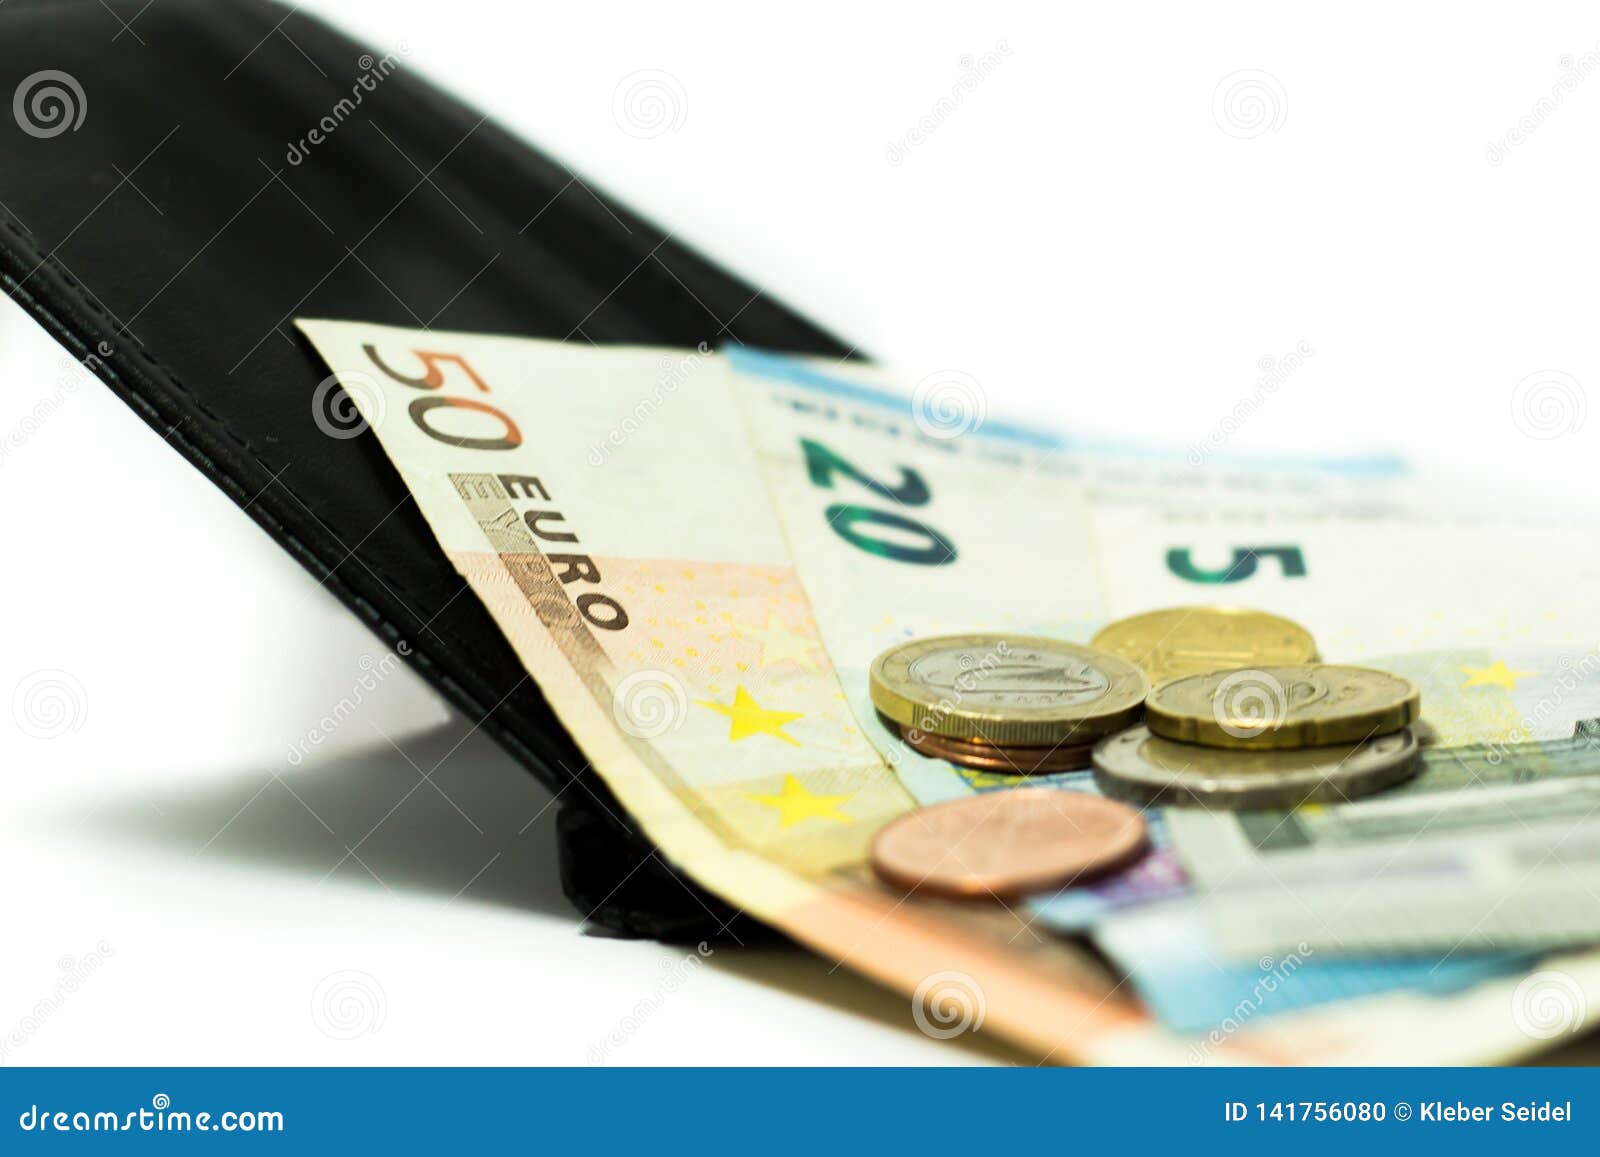 Euro Banknotes And Coins. Money In The Wallet. Economy In Europe Stock Photo - Image of income ...